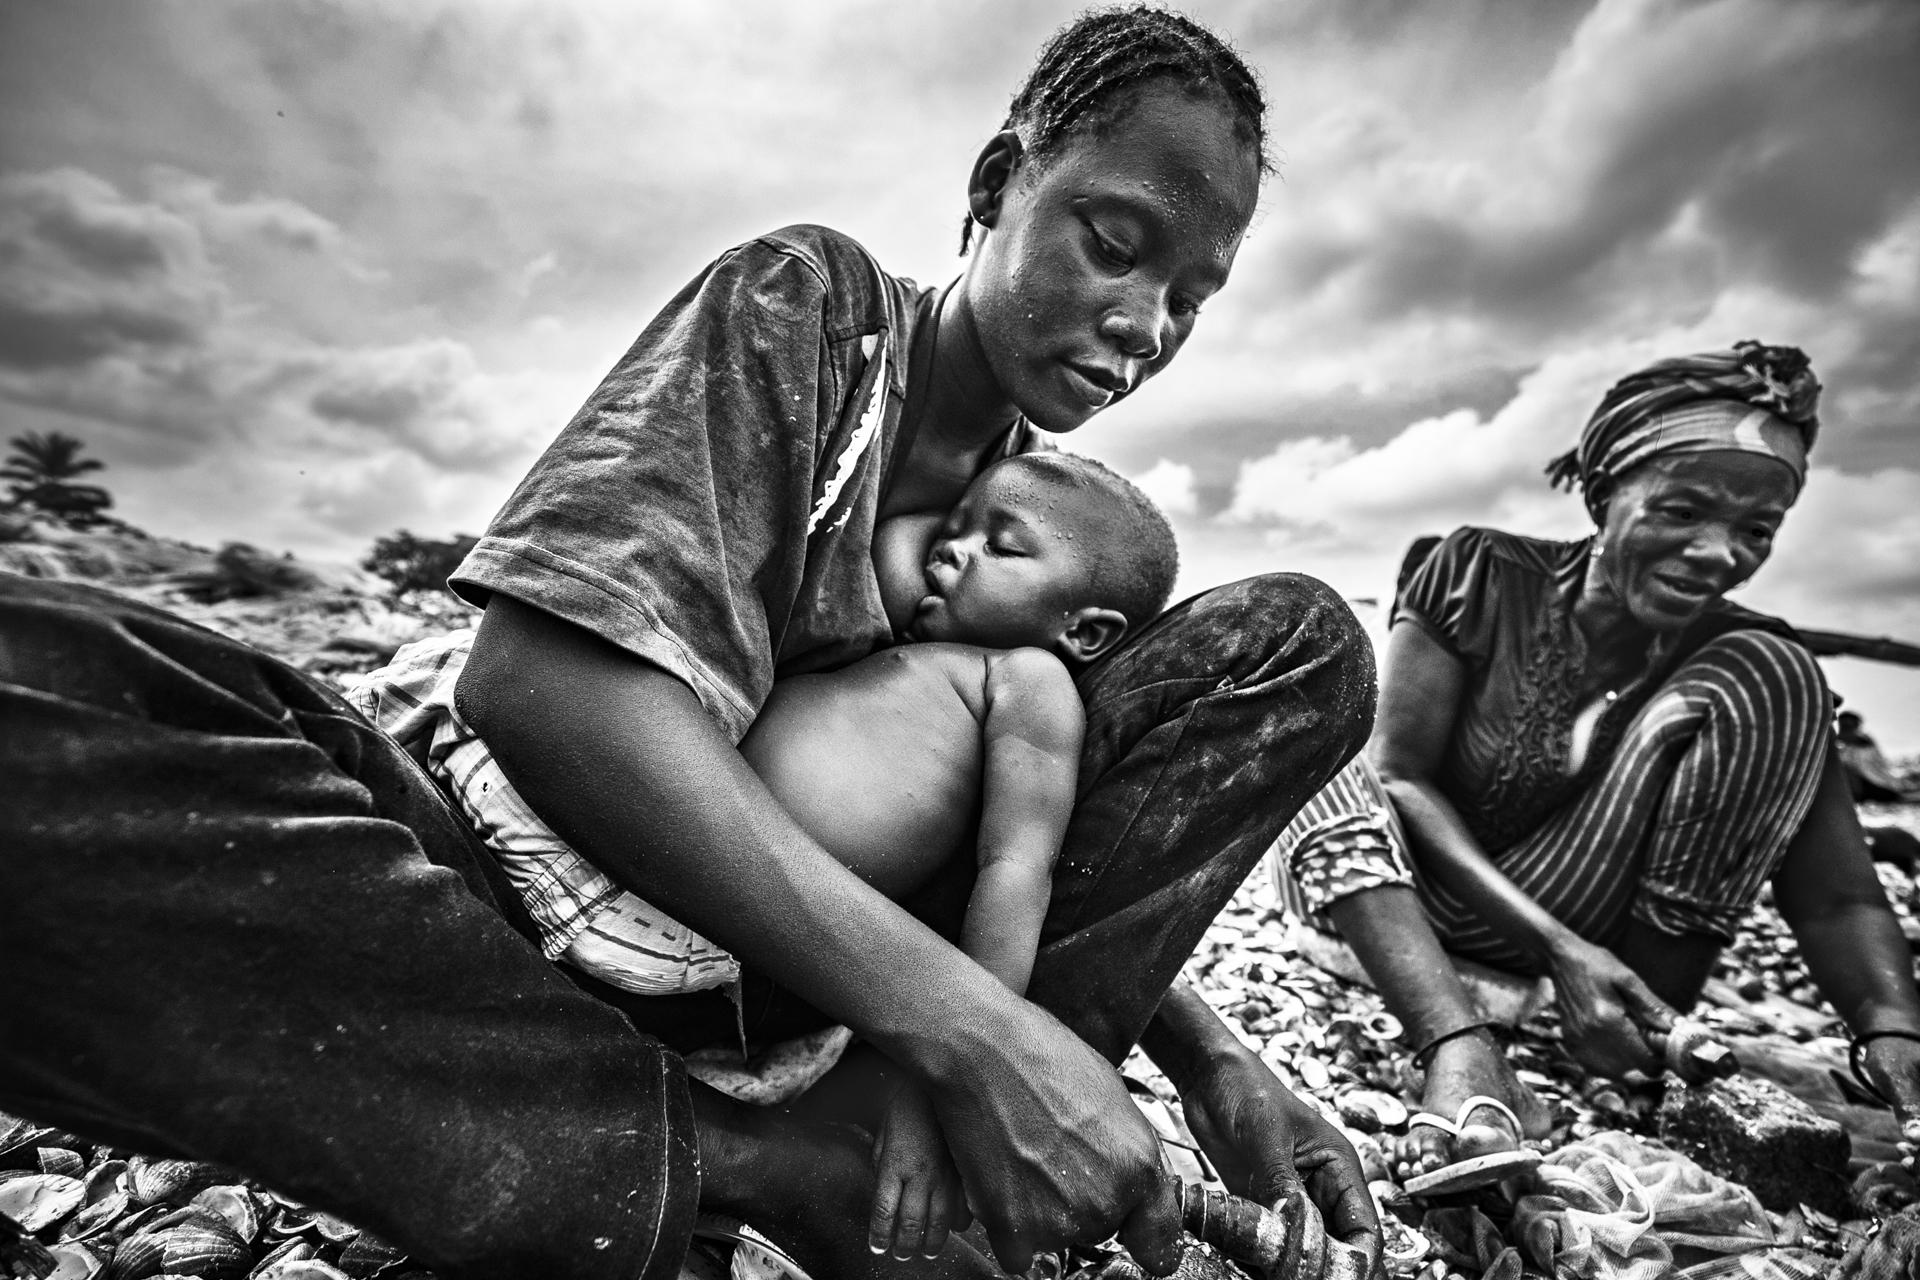 European Photography Awards Winner - Resilient mothers